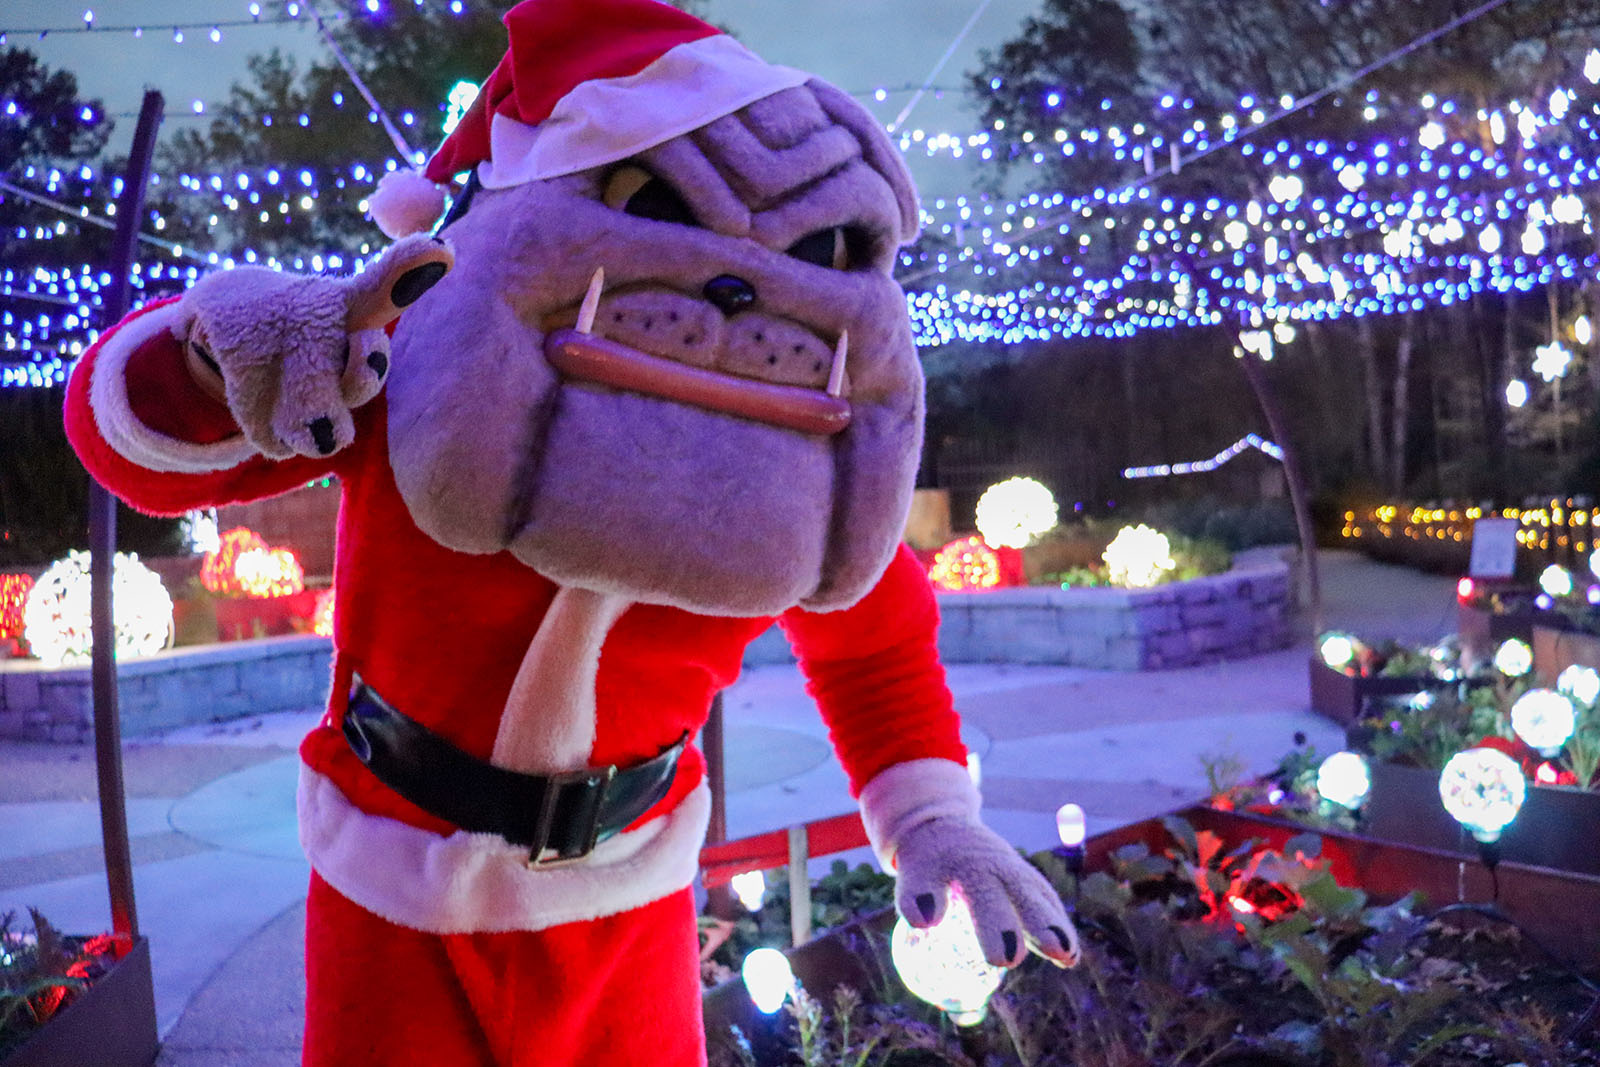 Hairy Dawg dressed in a Santa outfit touching a glass ball and pointing at the camera at the UGA Botanical Gardens.